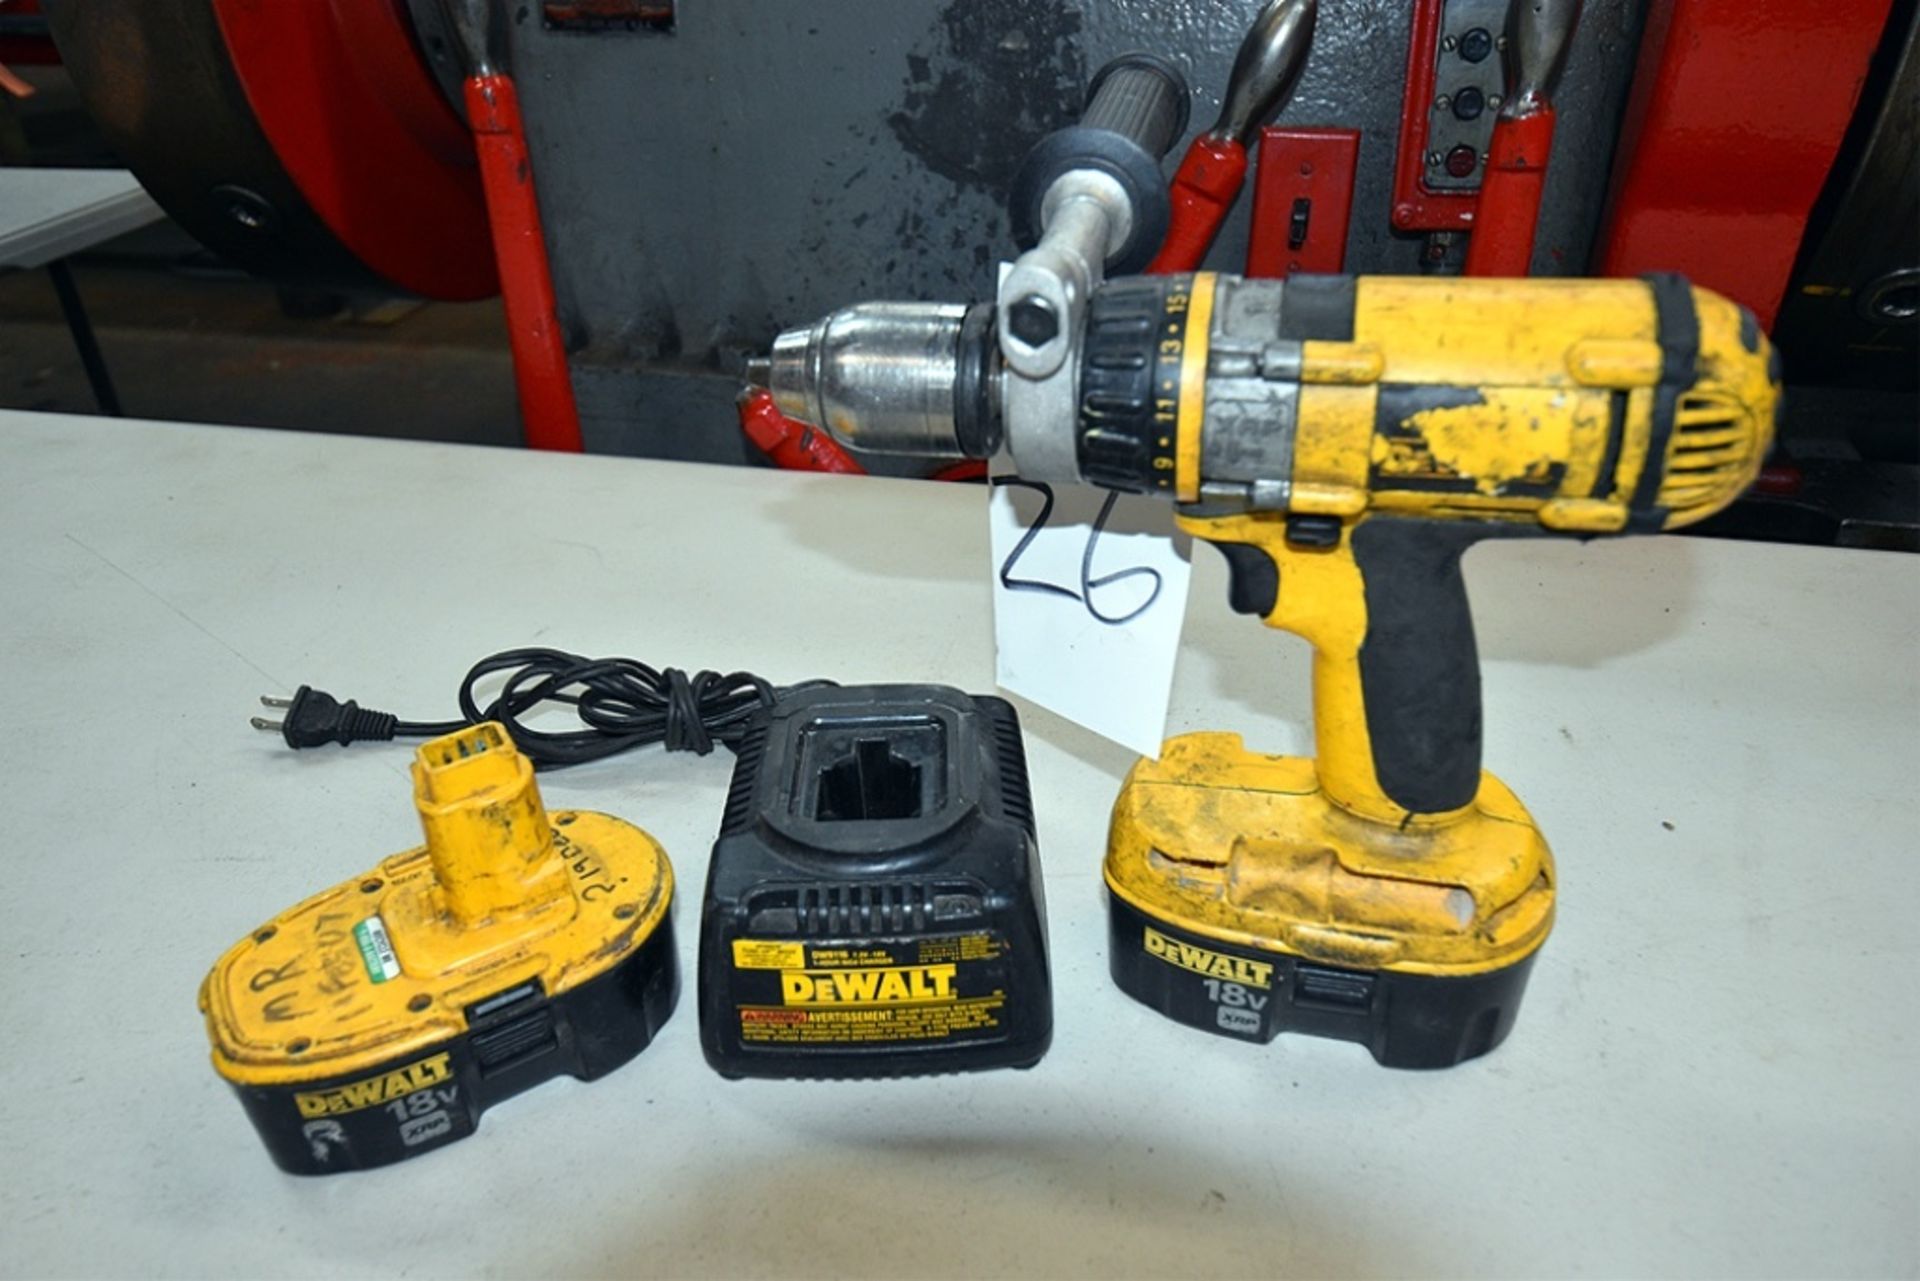 DeWalt 1/2" Cordless Drill/Hammer Drill w/ (2) Batteries and (1) Charger